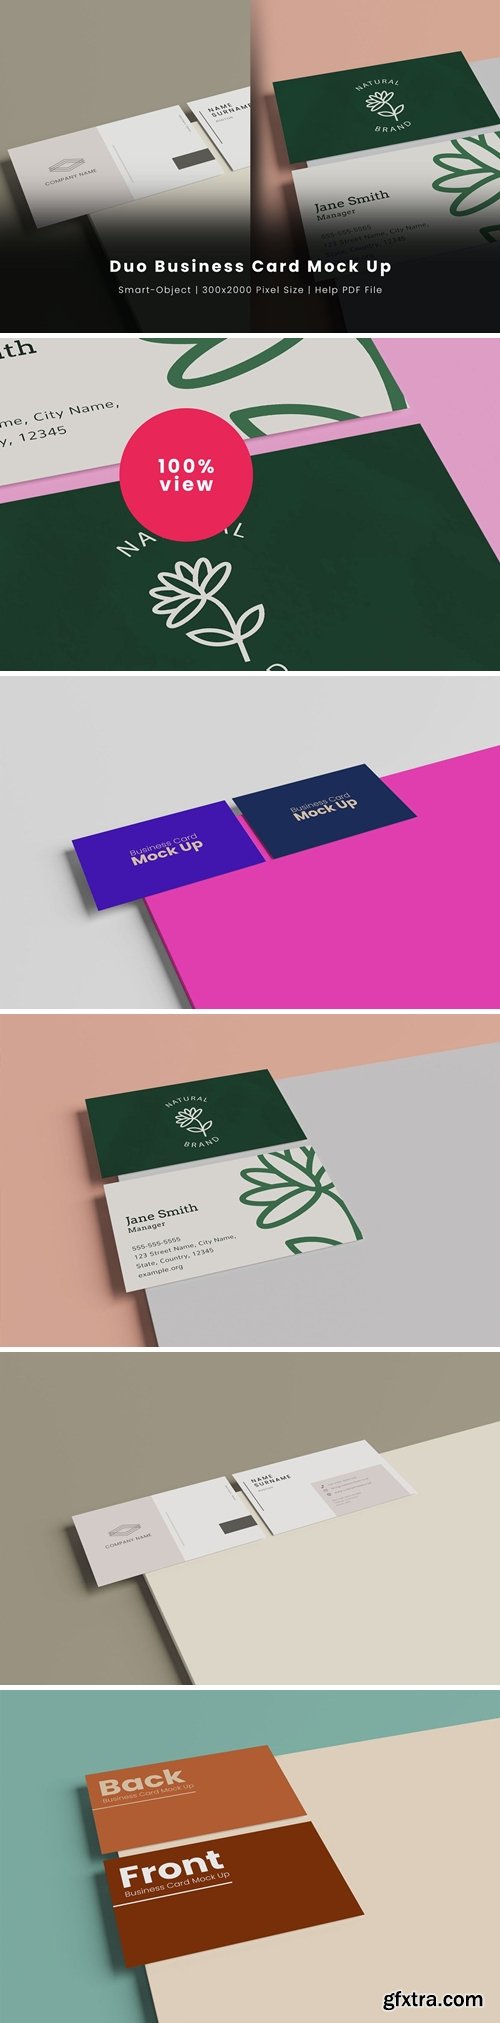 Duo Business Card Mock Up